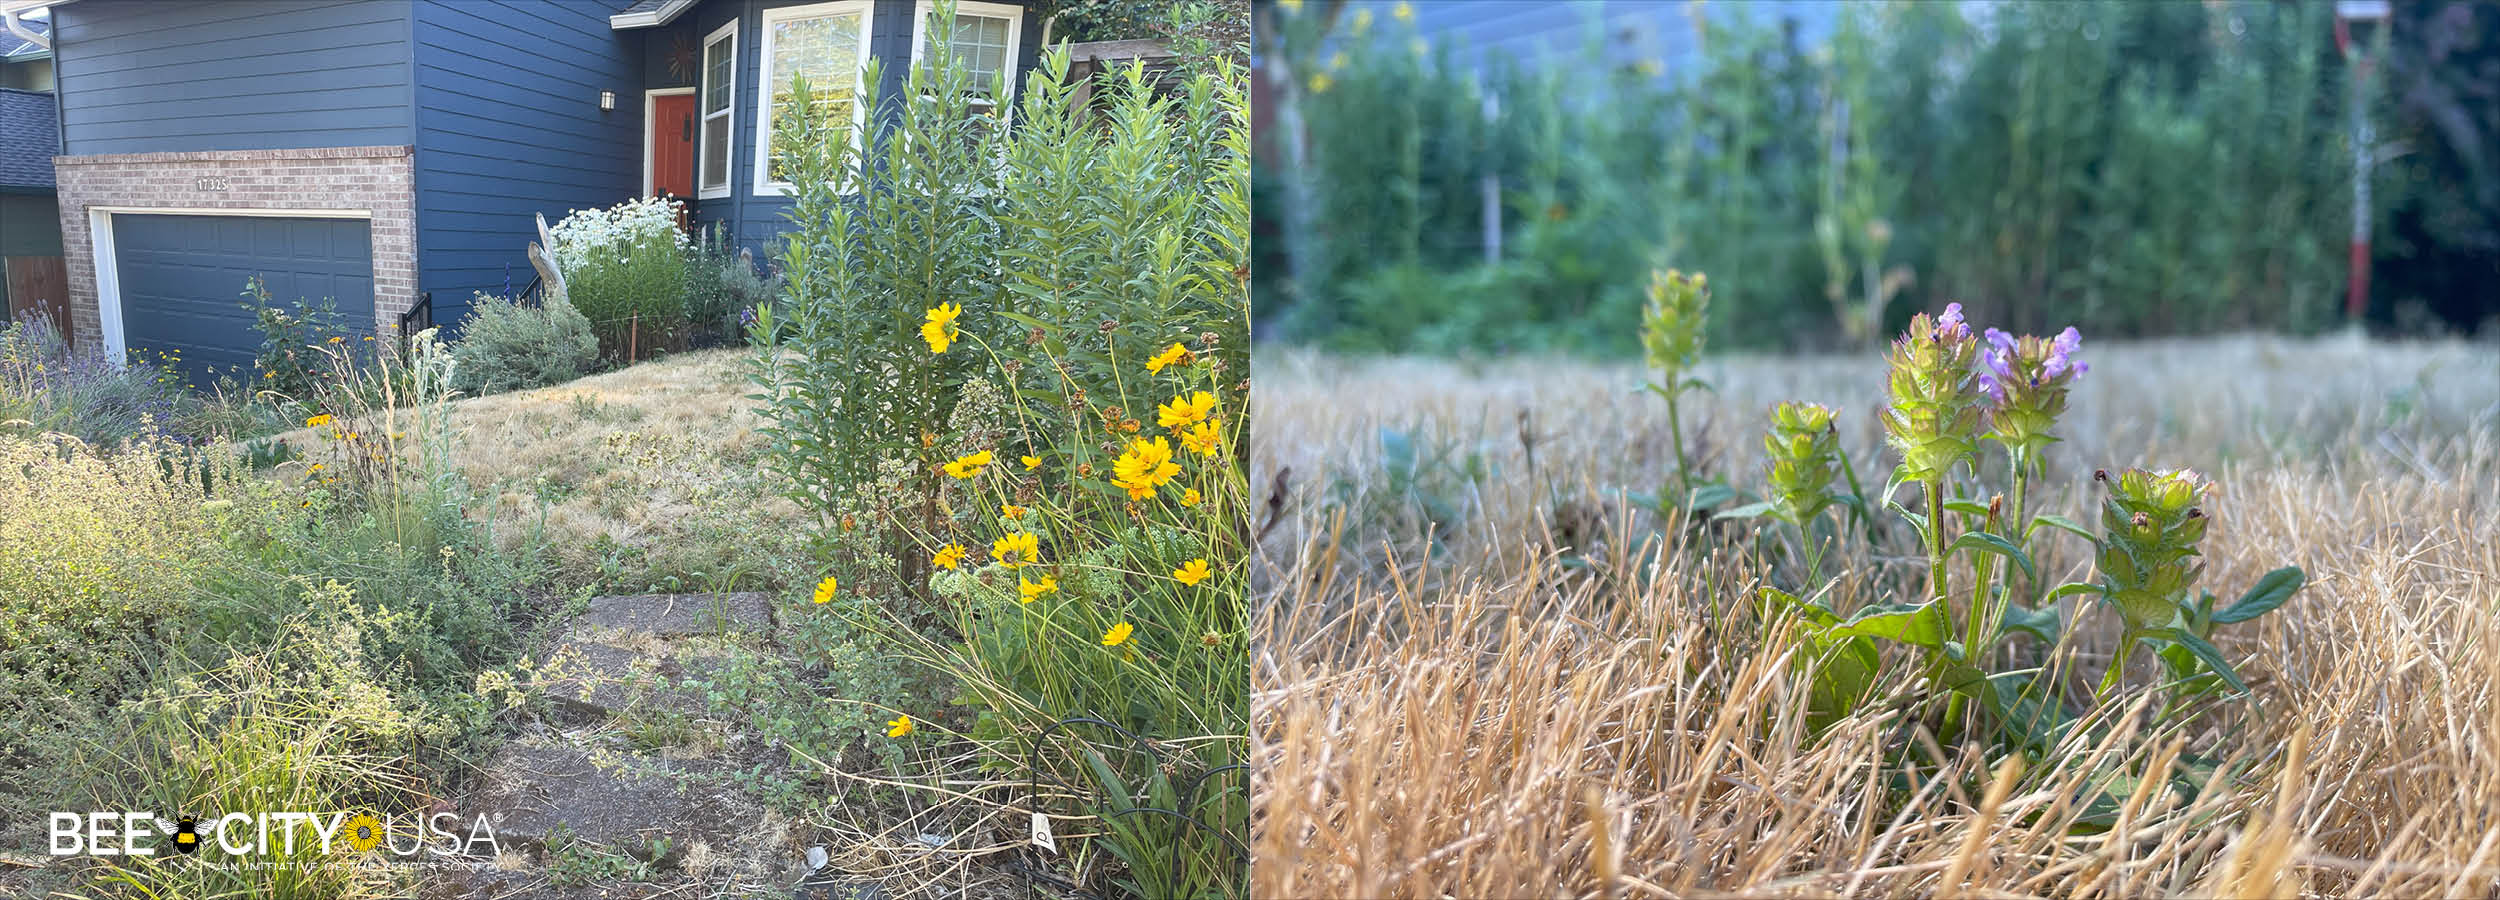 Left photo: A small tan-colored lawn with tall green plants around it and yellow flower on the right. Right photo: A closeup of a tan lawn with a small purple flower blooming.